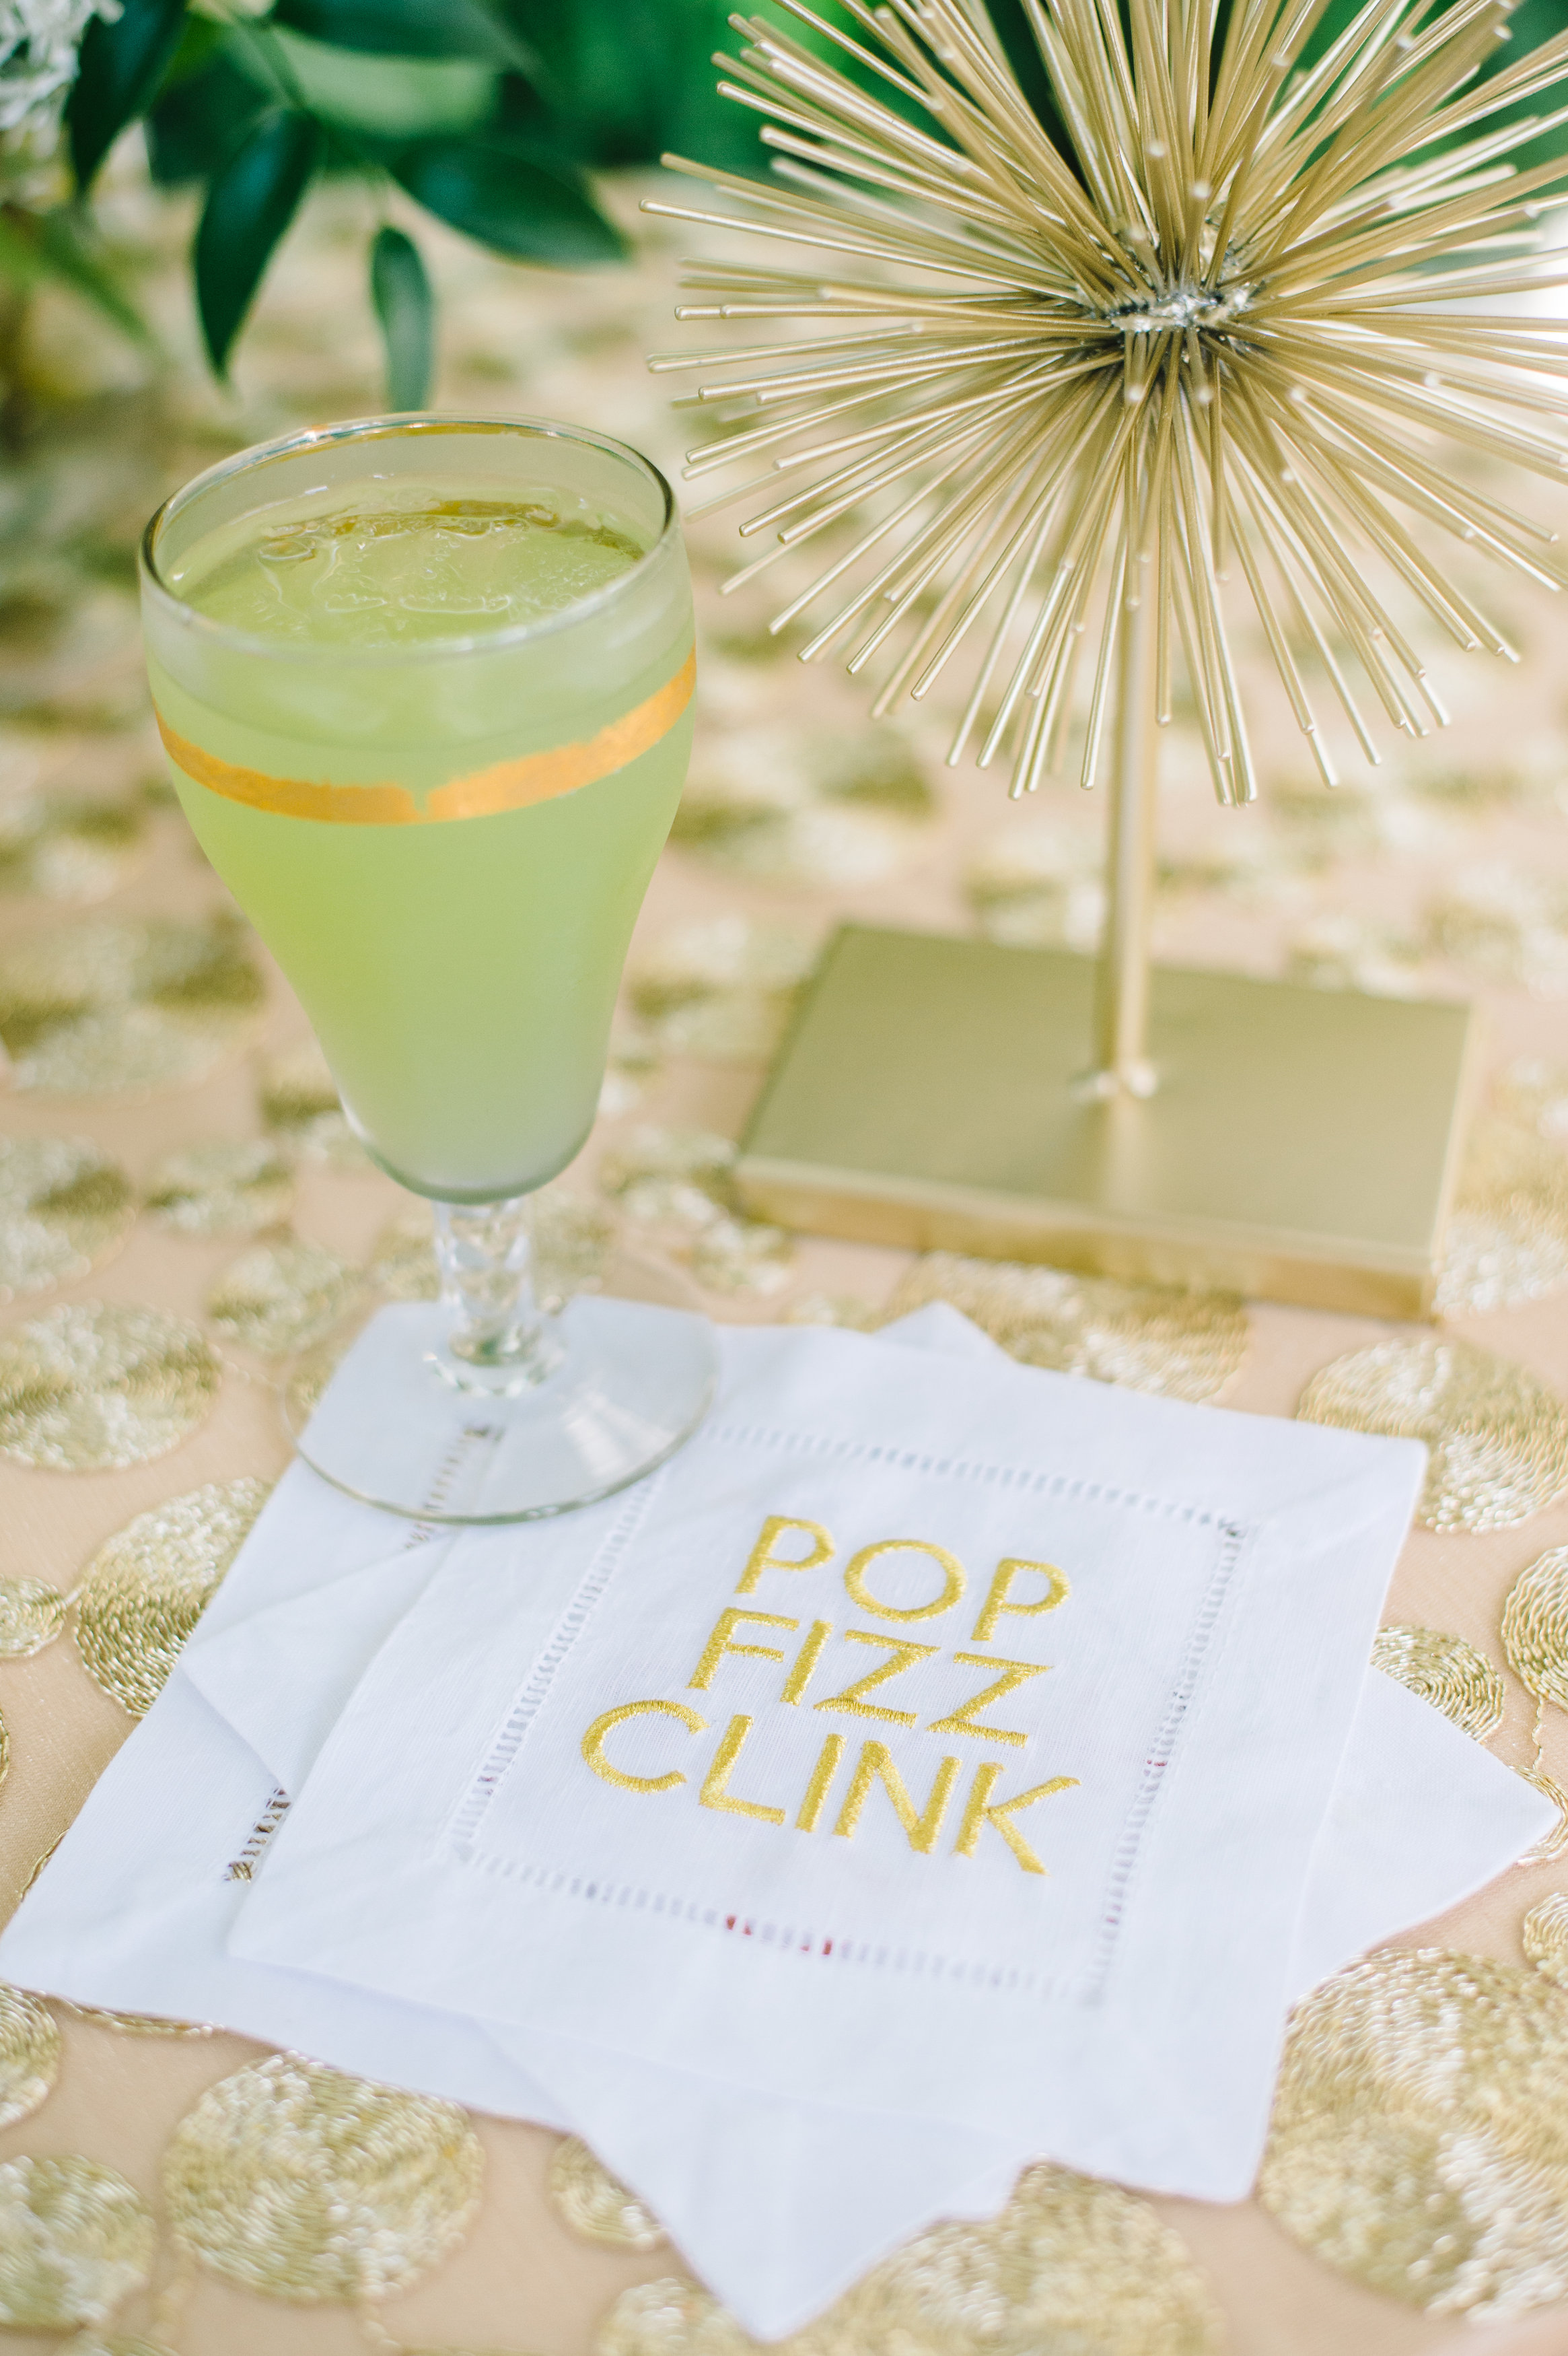 pop-fizz-clink-cocktail-napkins-charleston-made-on-marlow-the-knot-market-mixer